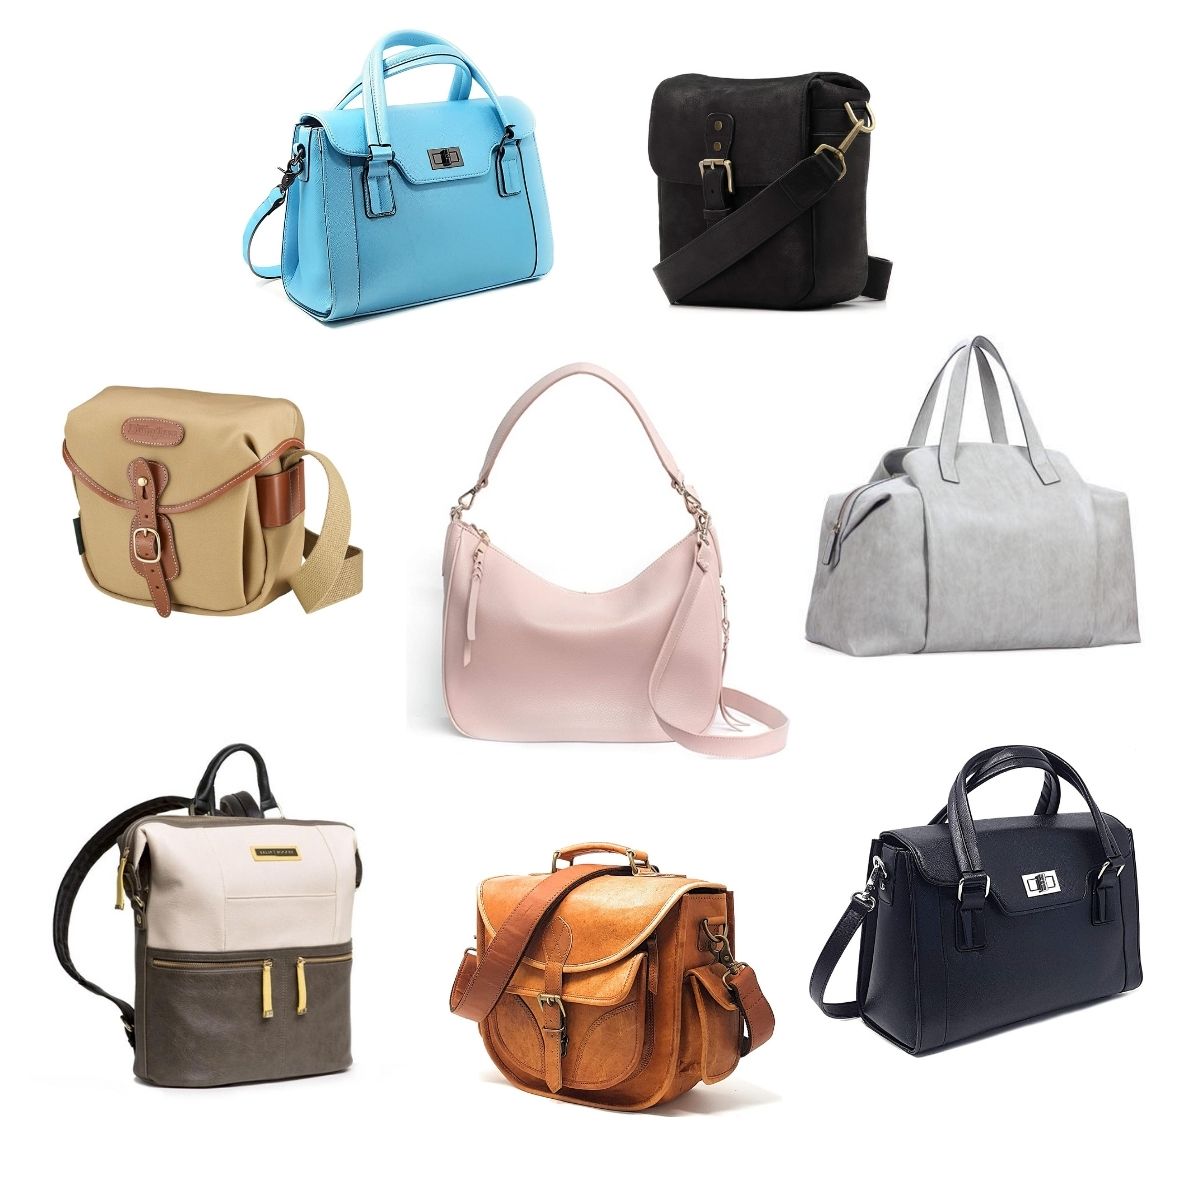 15 Stylish Camera Bags for Women - Snap Happy Mom